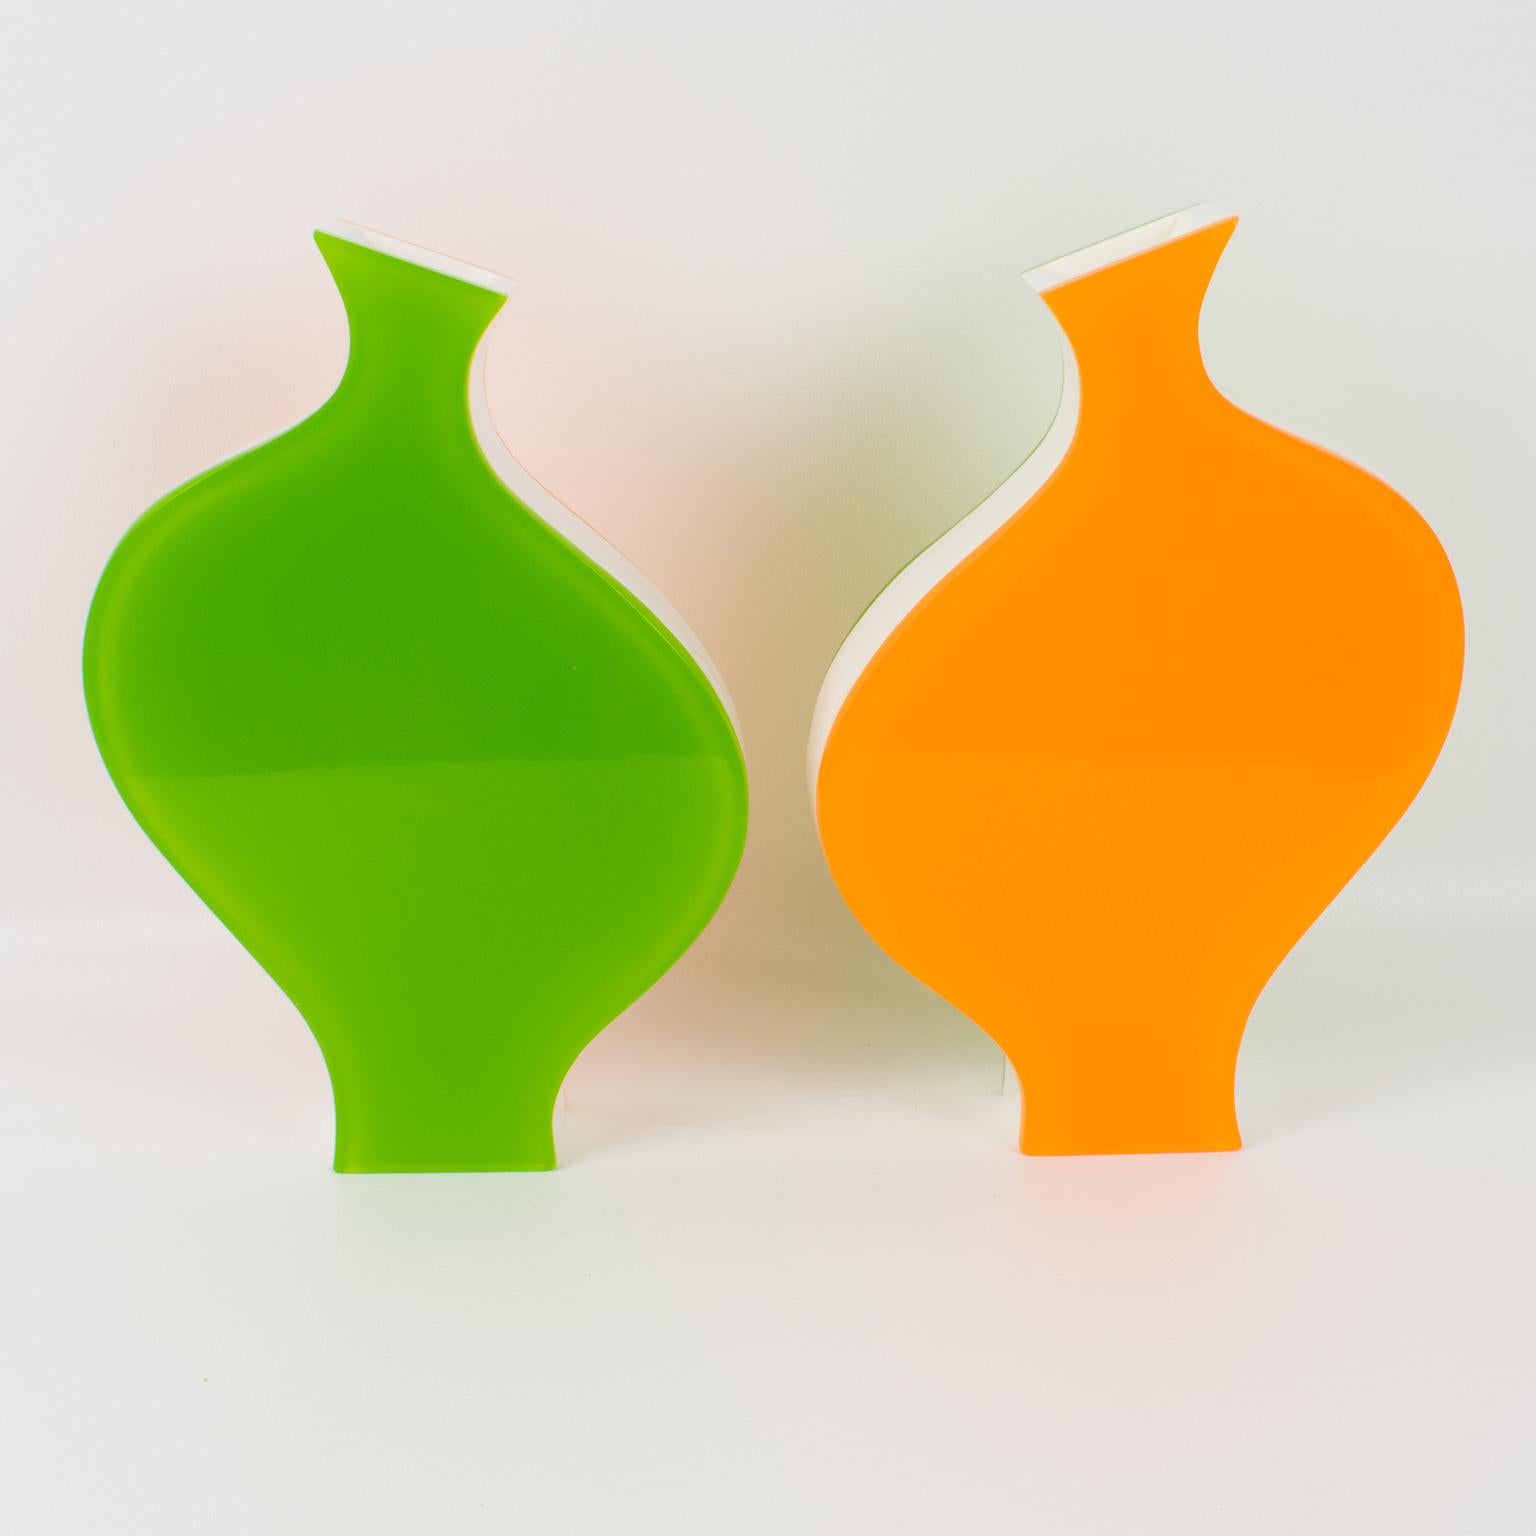 Villeroy & Boch produced that lovely pair of vases in the 1990s. This playful design is modern with an incredible color combination. Each vase is built with a multilayer sandwich shape of Lucite or Plexiglass in tangerine orange, white, and apple